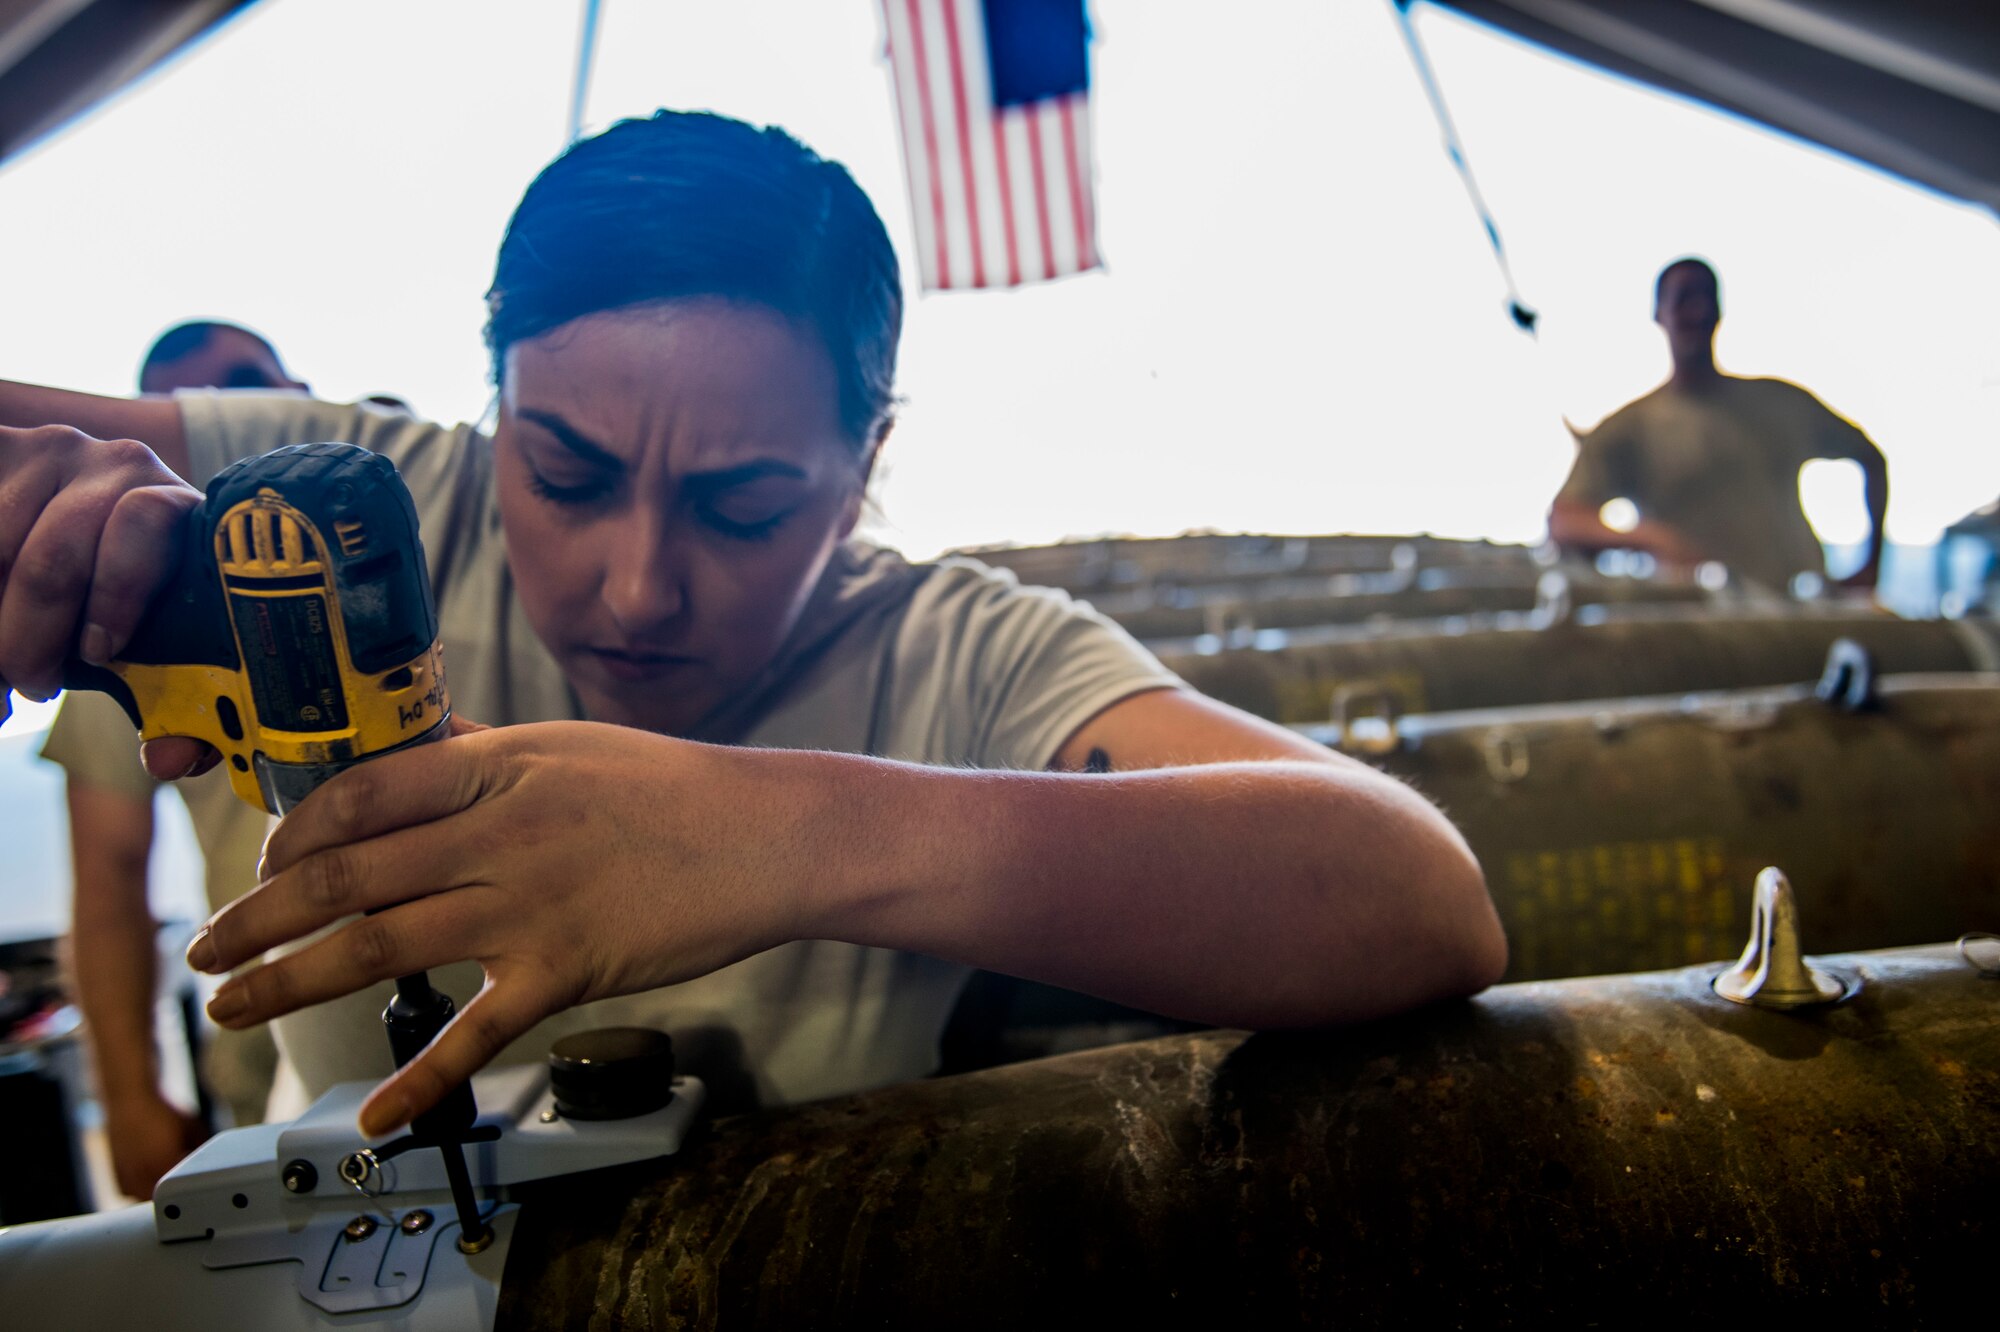 Staff Sgt. Elizabeth Silva, 332nd Air Expeditionary Wing command chief executive assistant, drills in a tail fin Mar. 7, 2017, in Southwest Asia. Silva and other Airmen built a dozen GBU-38 bombs in honor of Women’s History Month. (U.S. Air Force photo by Staff Sgt. Eboni Reams)